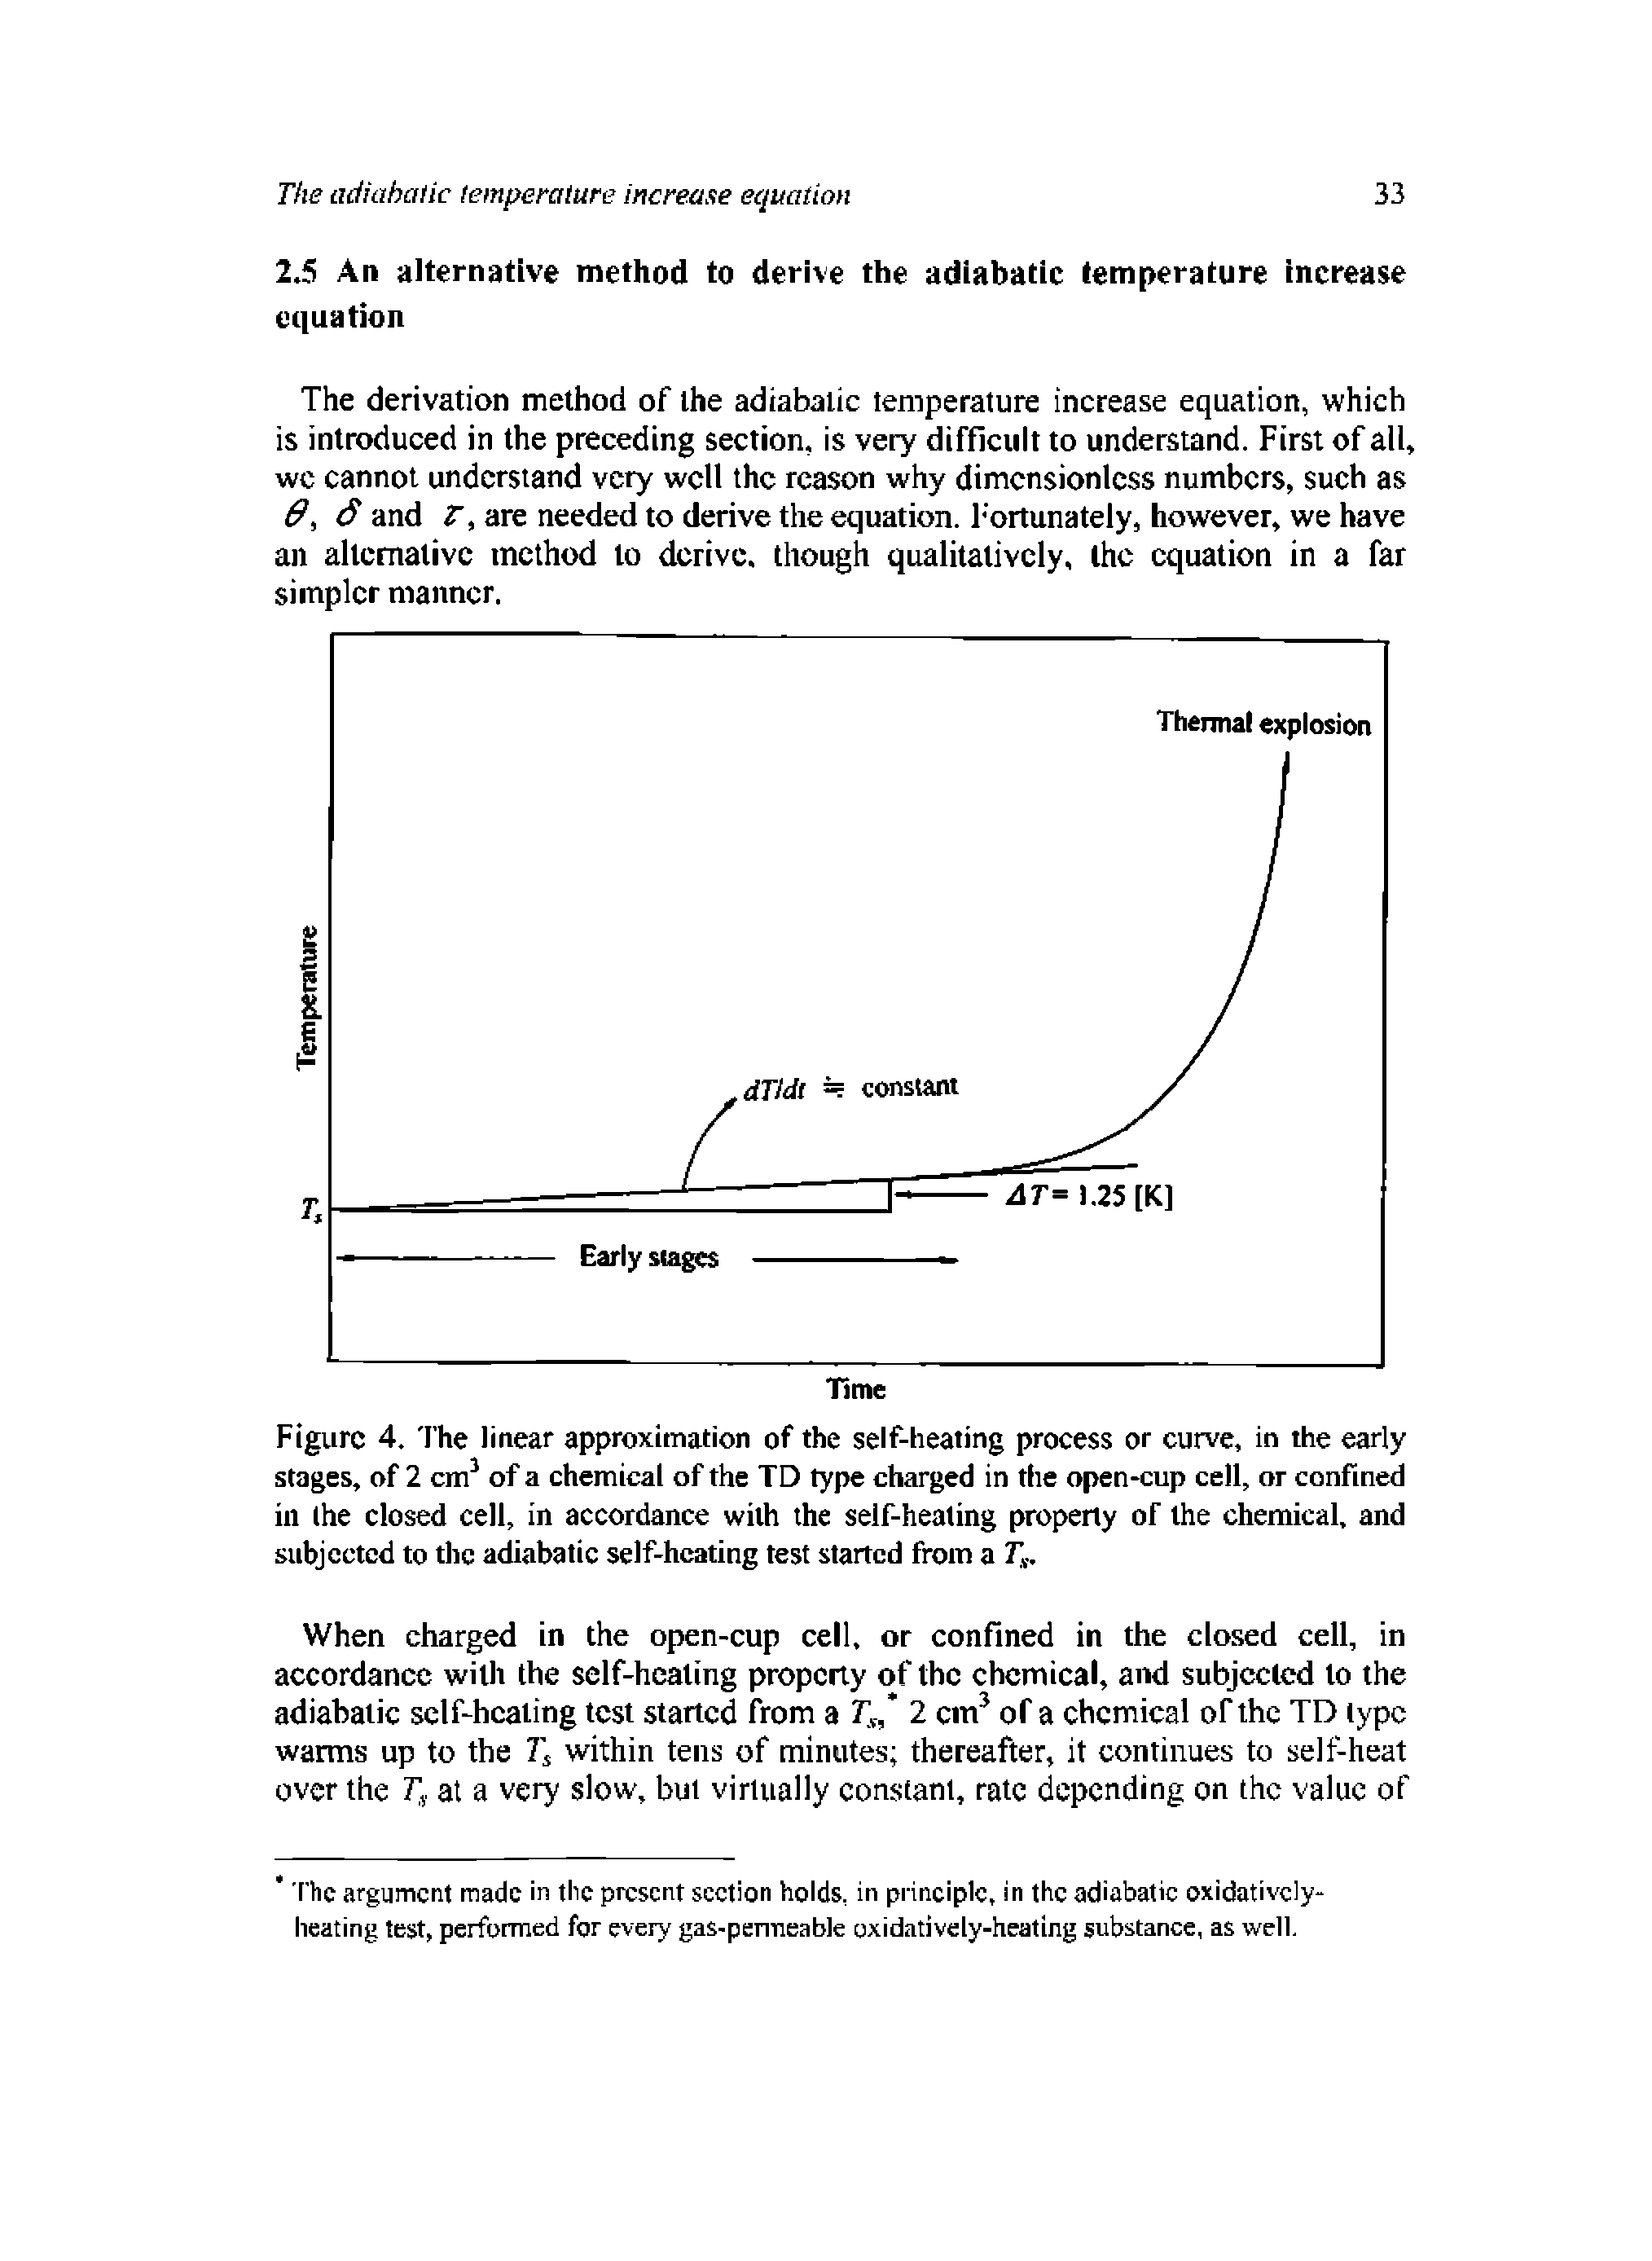 Figure 4. The linear approximation of the self-heating process or curve, in the early stages, of 2 cm of a chemical of the TD type charged in the open-cup cell, or confined in the closed cell, in accordance with the self-healing property of the chemical, and subjected to the adiabatic self-hcating test started from a T,.